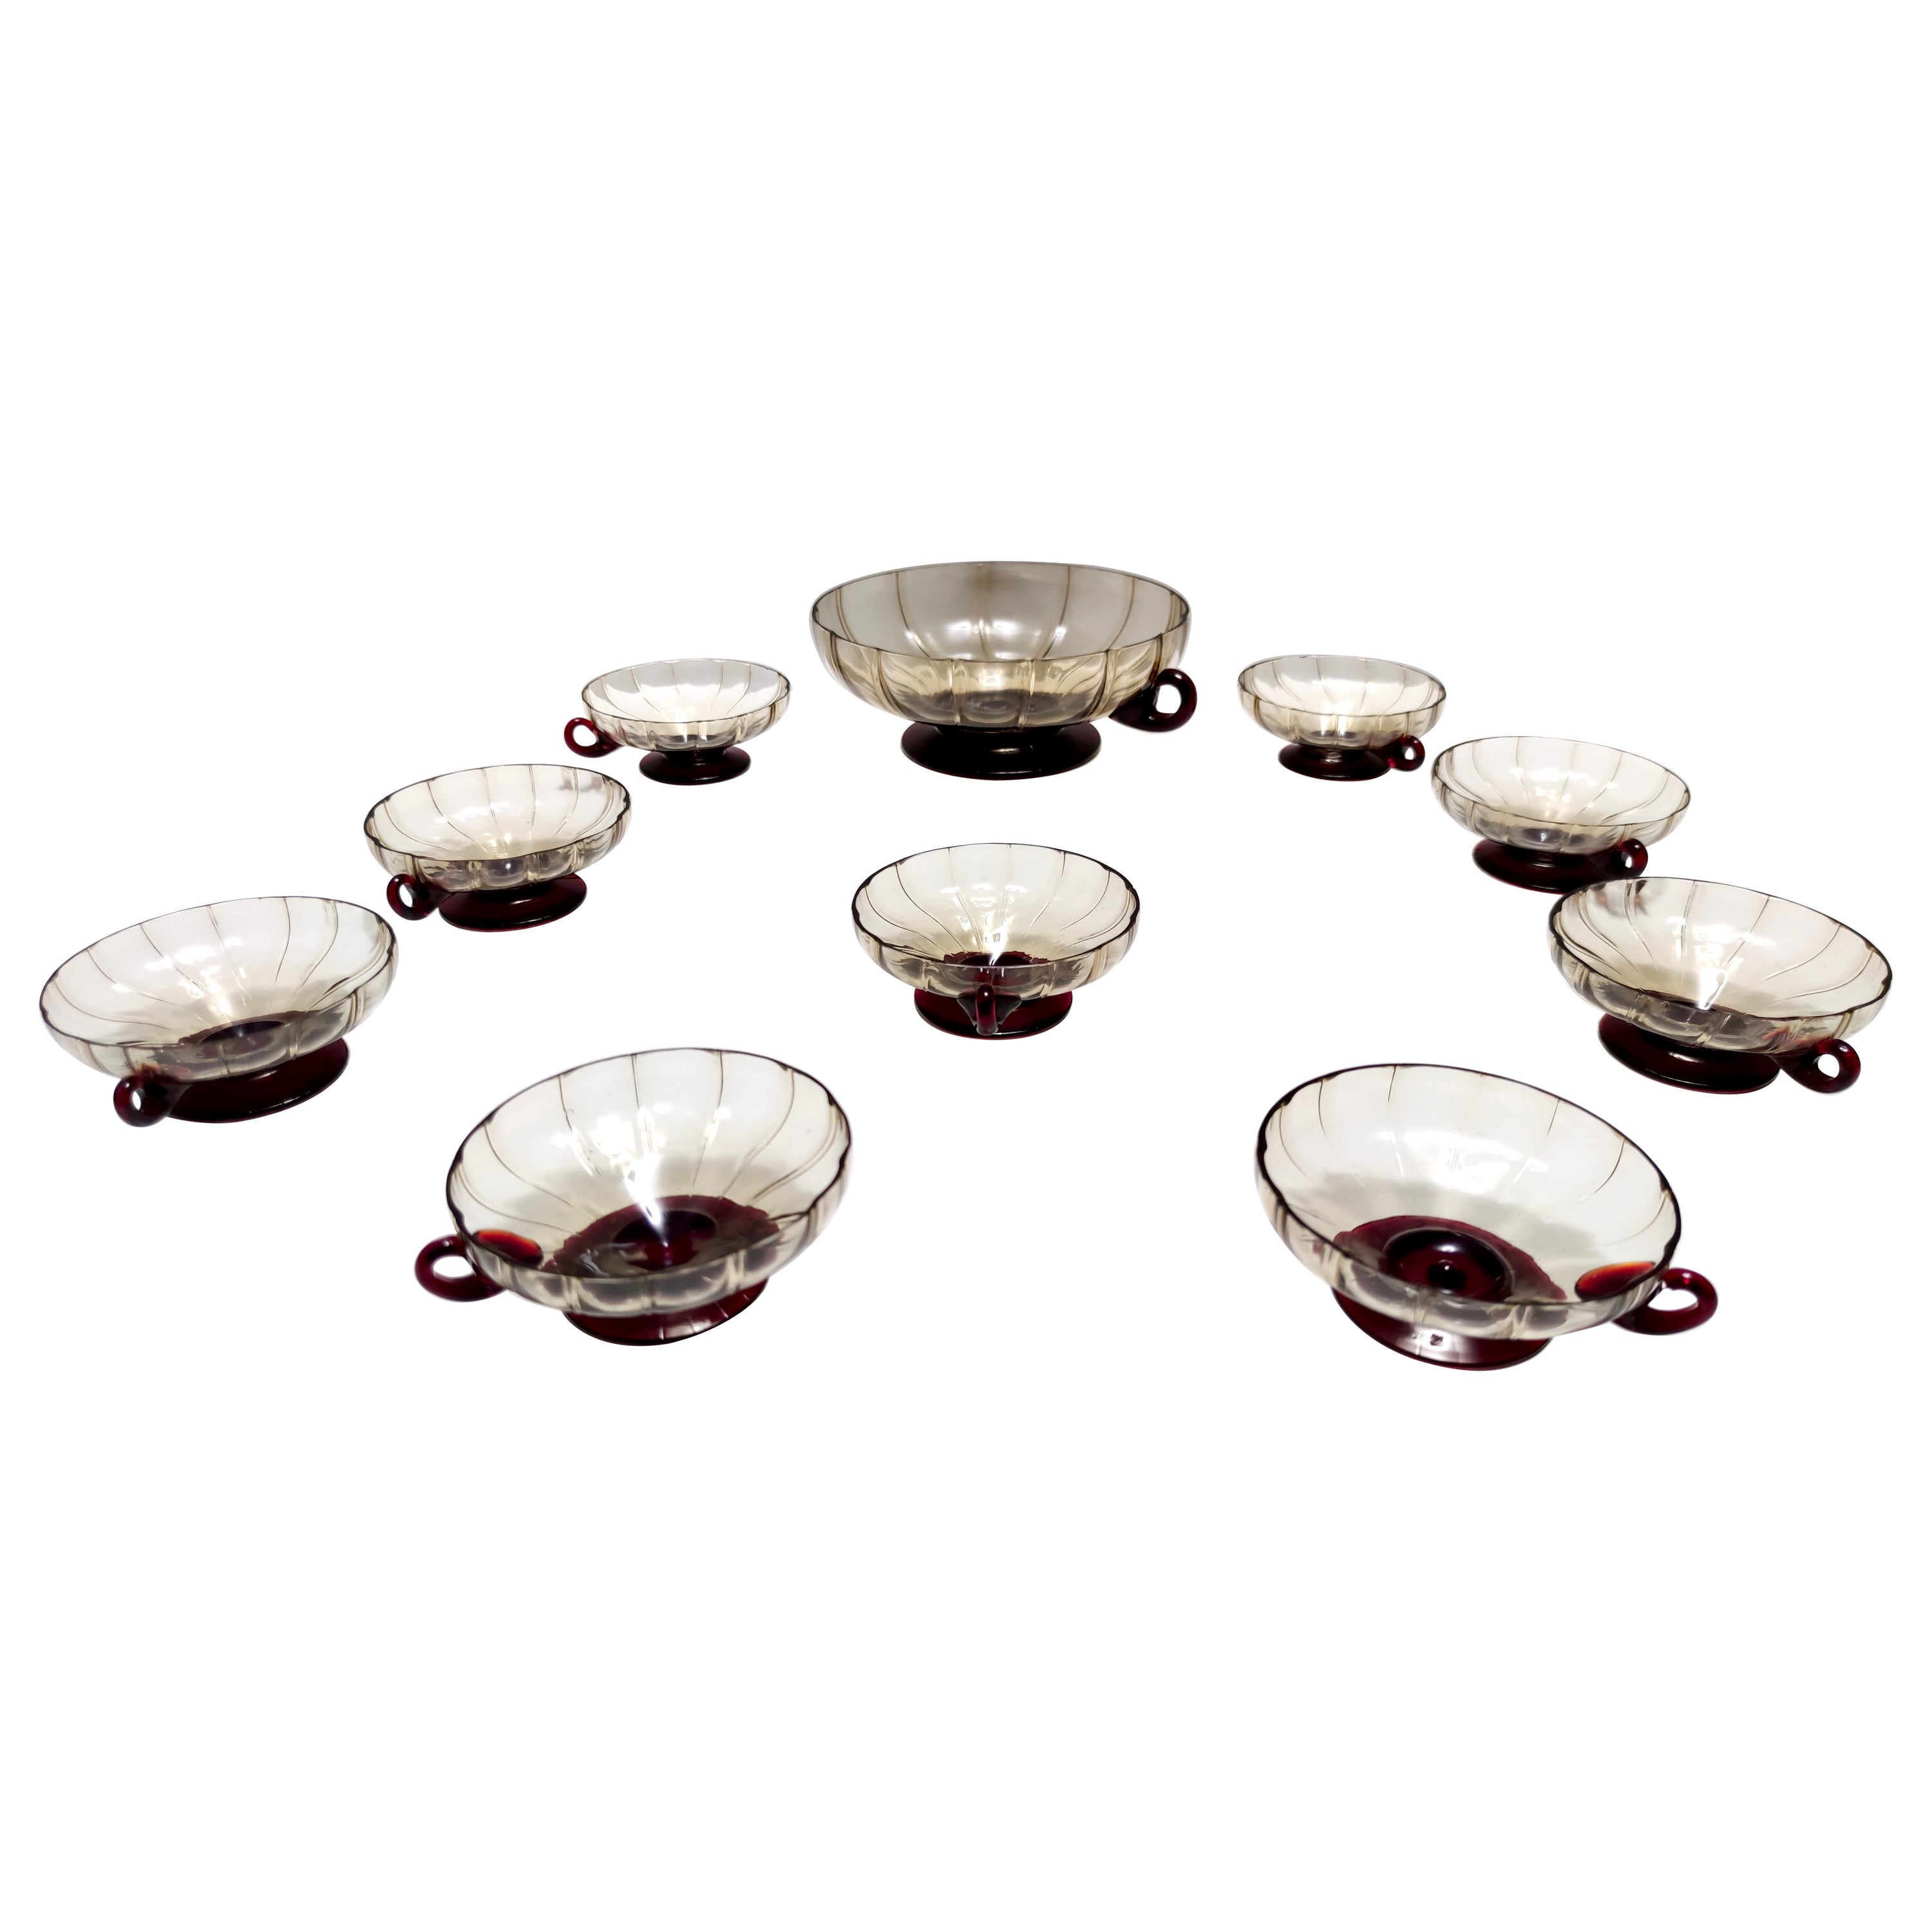 Set of Ten Smoked and Crimson Murano Glass Dessert Bowls in the style of Zecchin